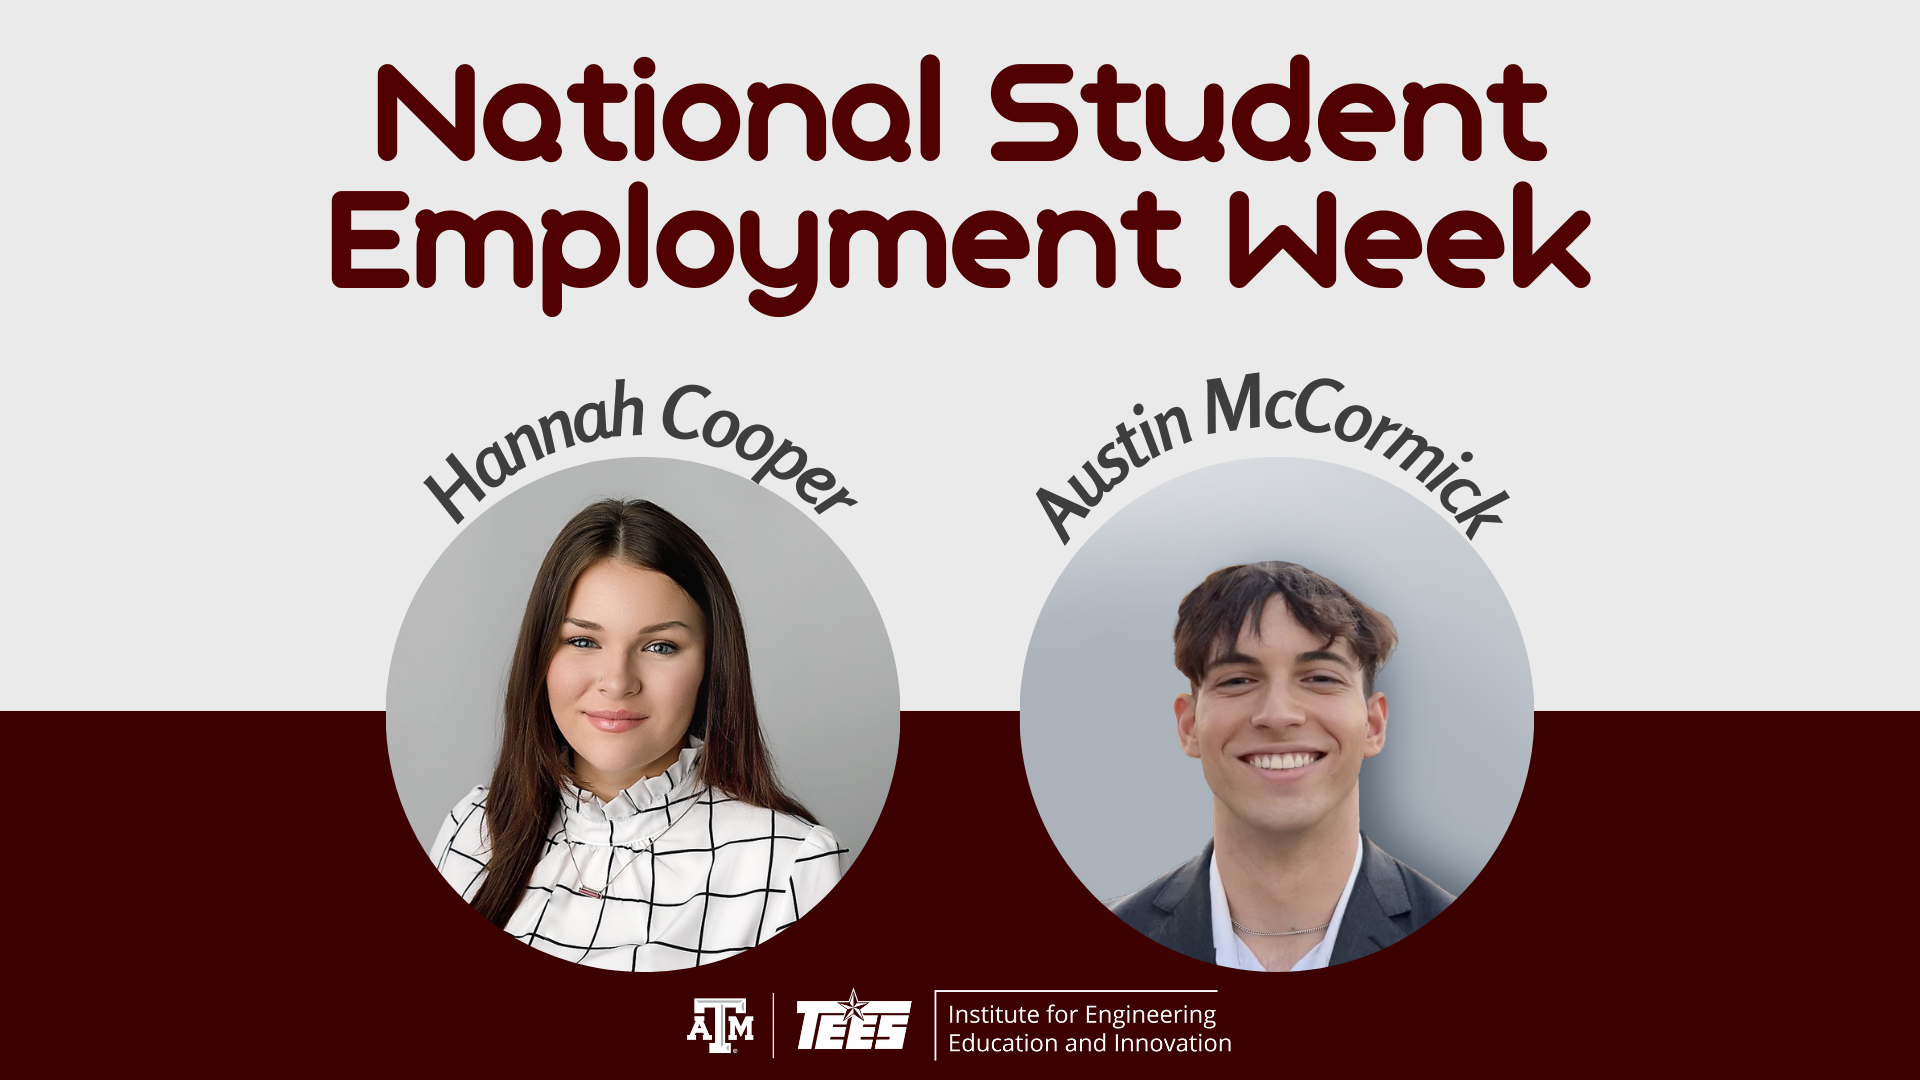 Celebrating National Student Employment Week Meet Two Valuable Members